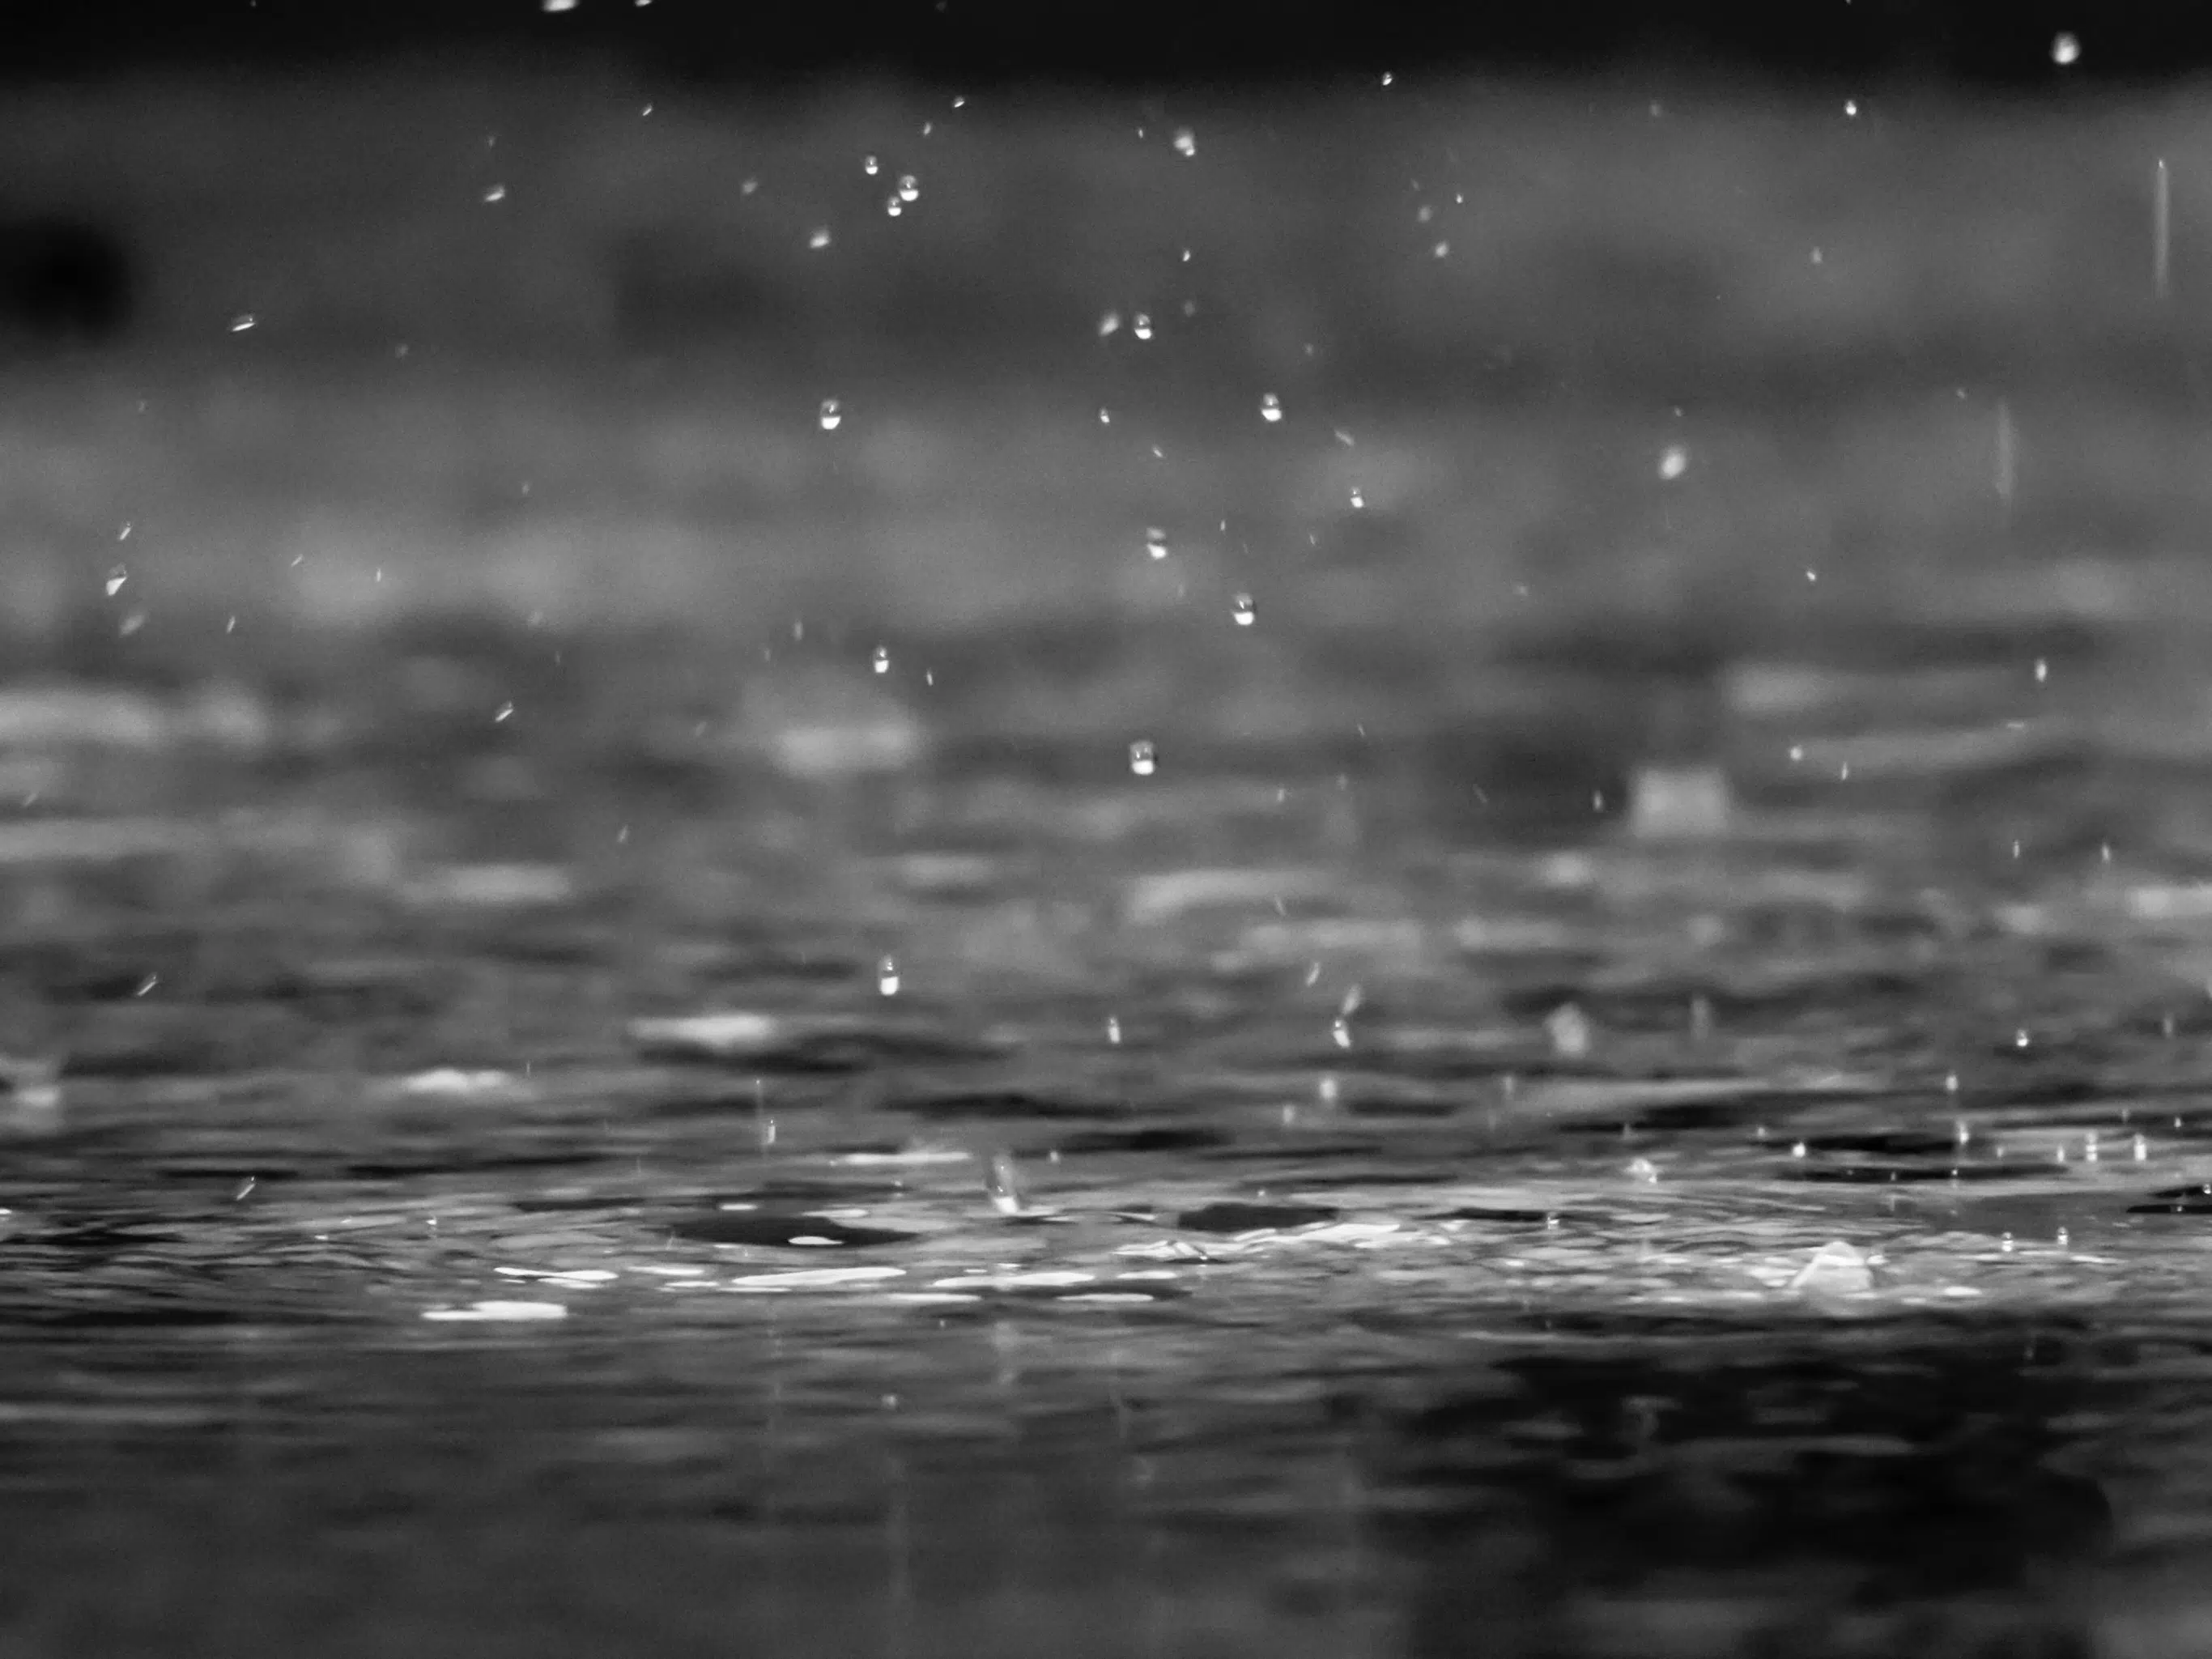 Rainfall warning for parts of southern N.B.